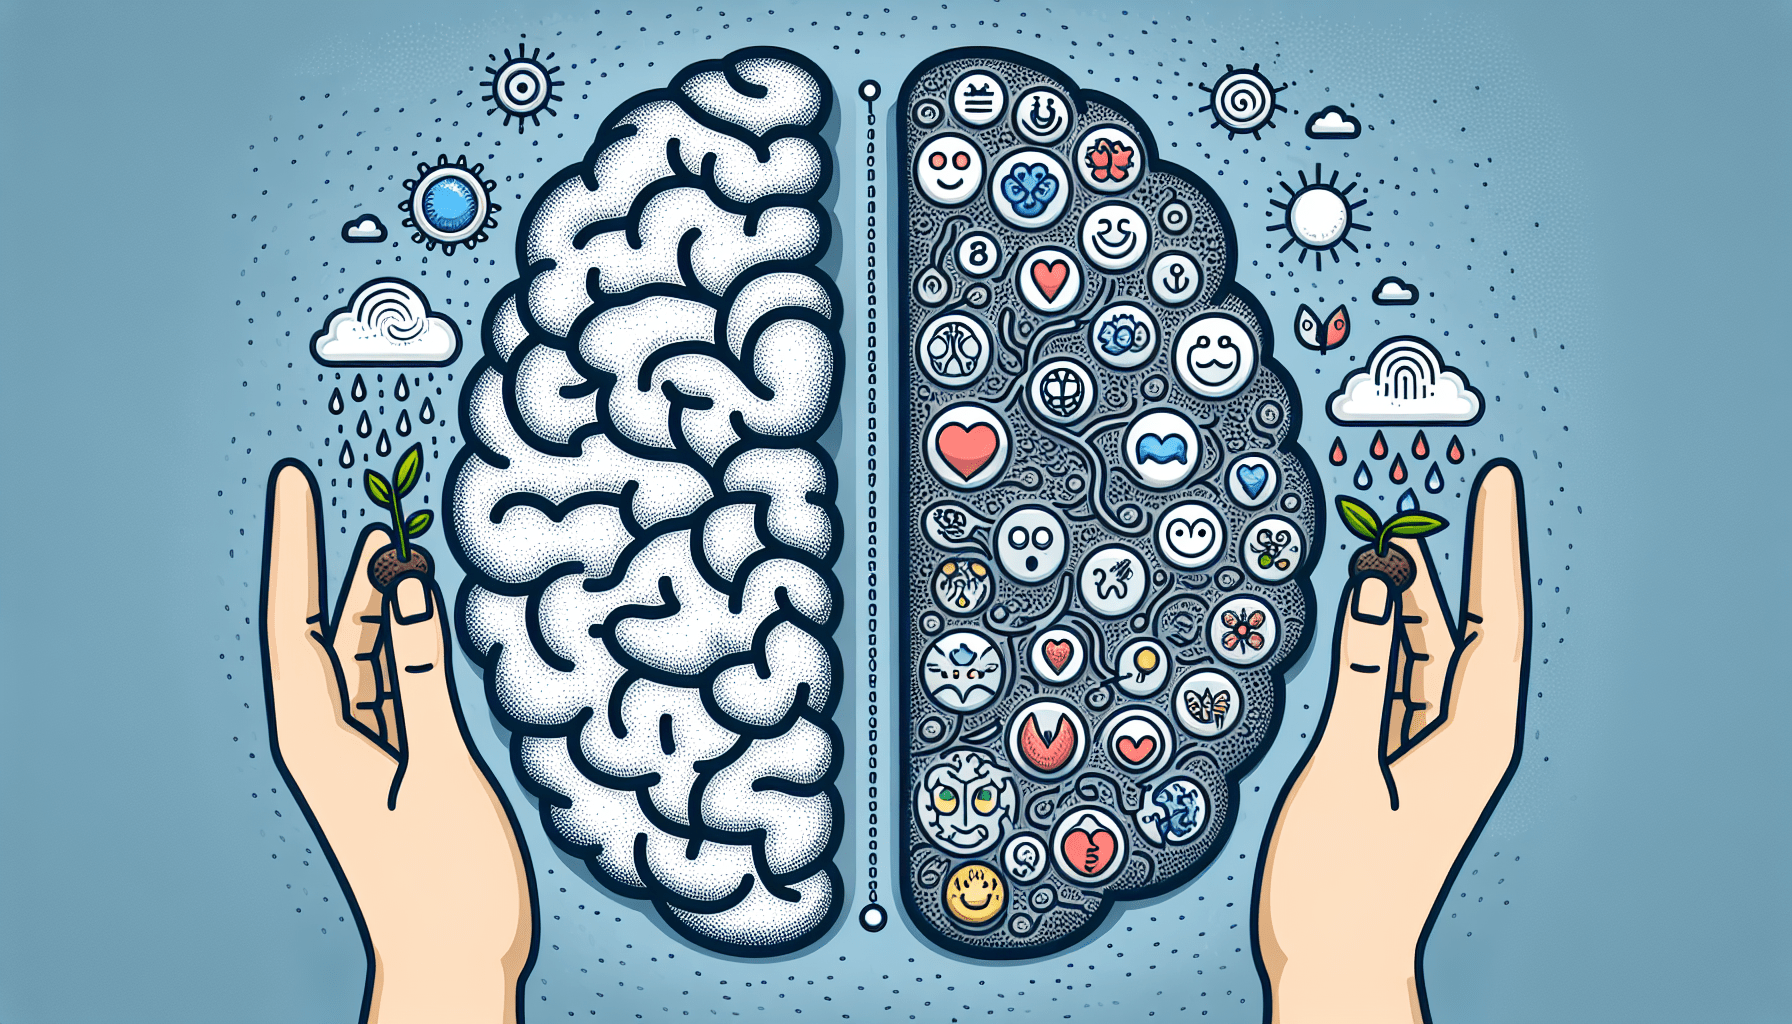 Illustration of two hands holding stylized human brains, one depicting logical patterns and shapes, and the other filled with emotional symbols and icons, against a blue background with weather elements above each brain.